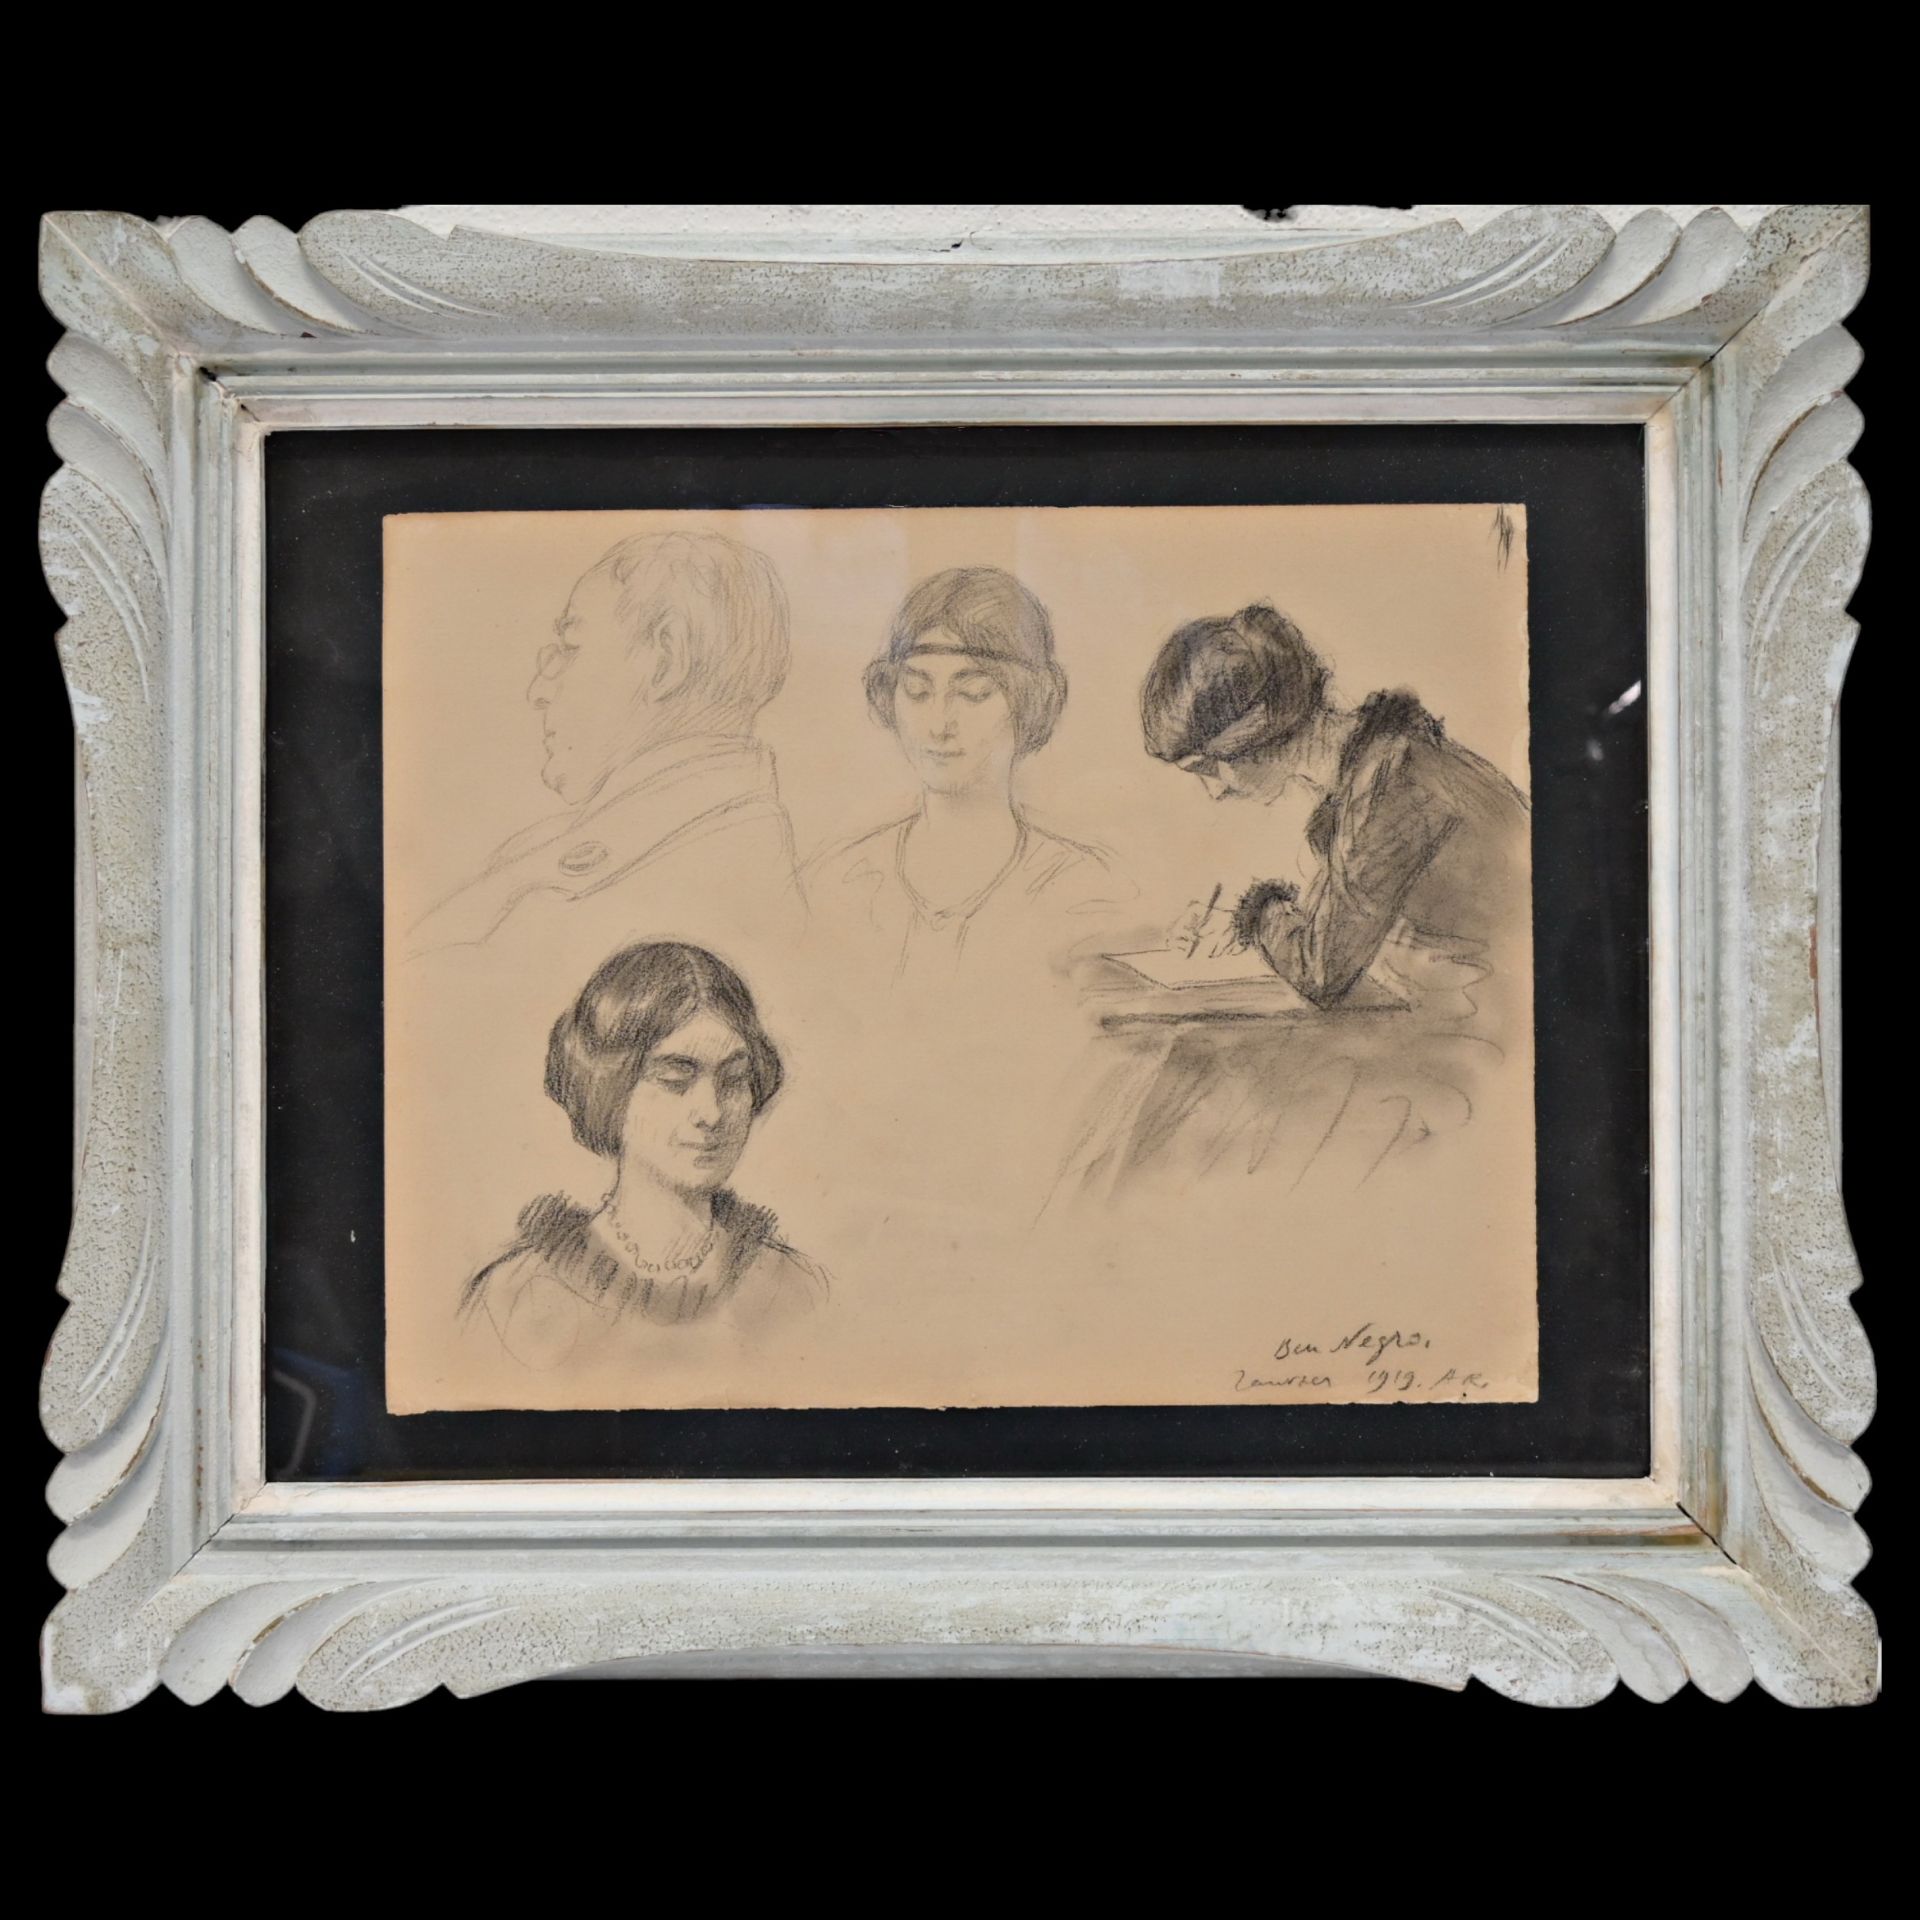 Ben Negro, sketch, 1919, pencil on paper. European painting of the 20th century.